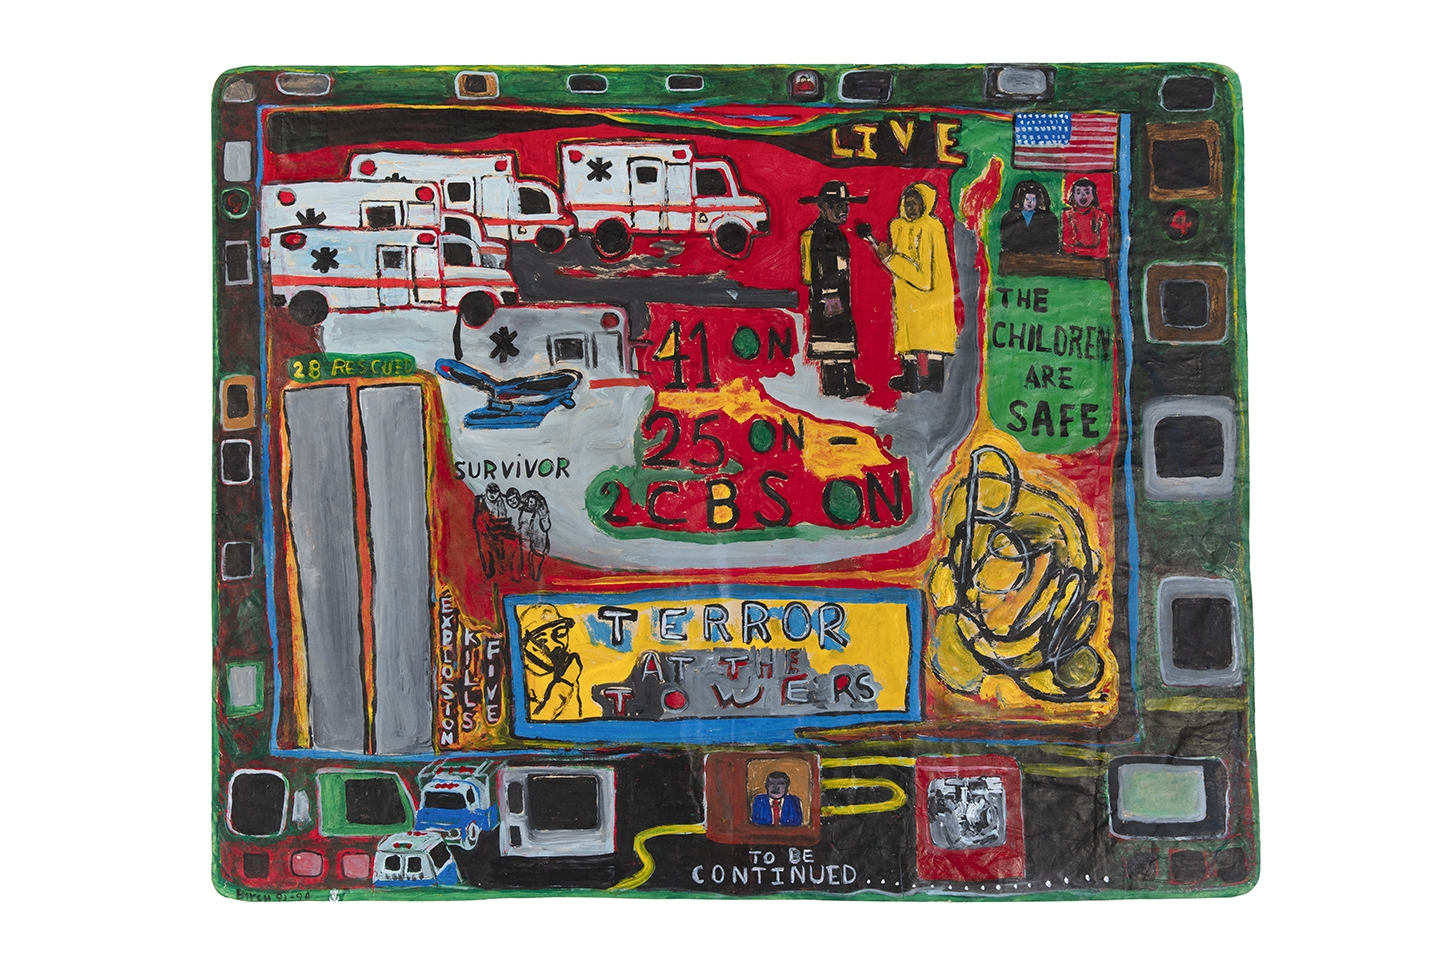 Terror at the Towers, 1993-94
Mixed media on paper
33.5 x 41.75 inches